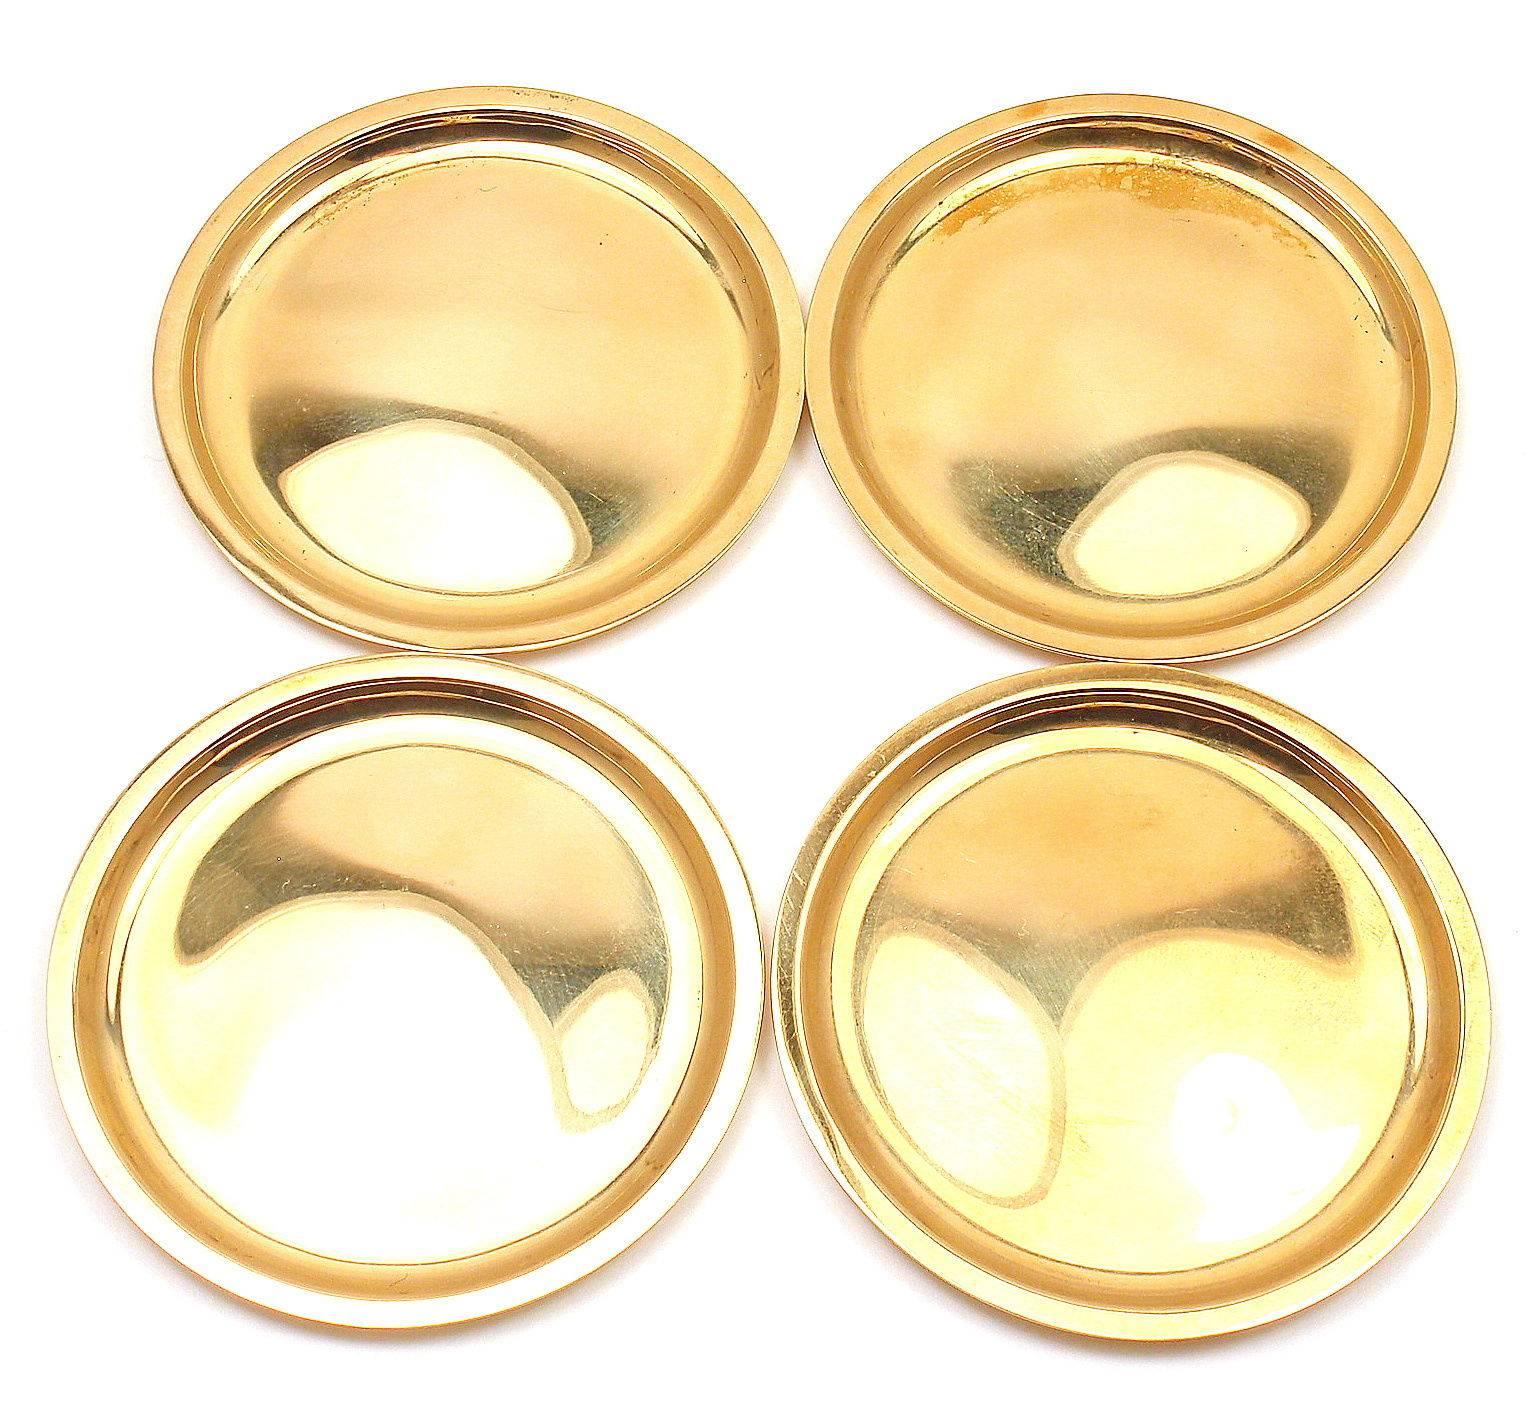 18k Solid Yellow Gold Set of Four Vintage Coasters by Cartier.

Details:
Measurements: each coaster 2.65 inches
Weight:  117 grams
Stamped Hallmarks: each coaster is signed Cartier 18k

*Free Shipping within the United States*

Your Price: